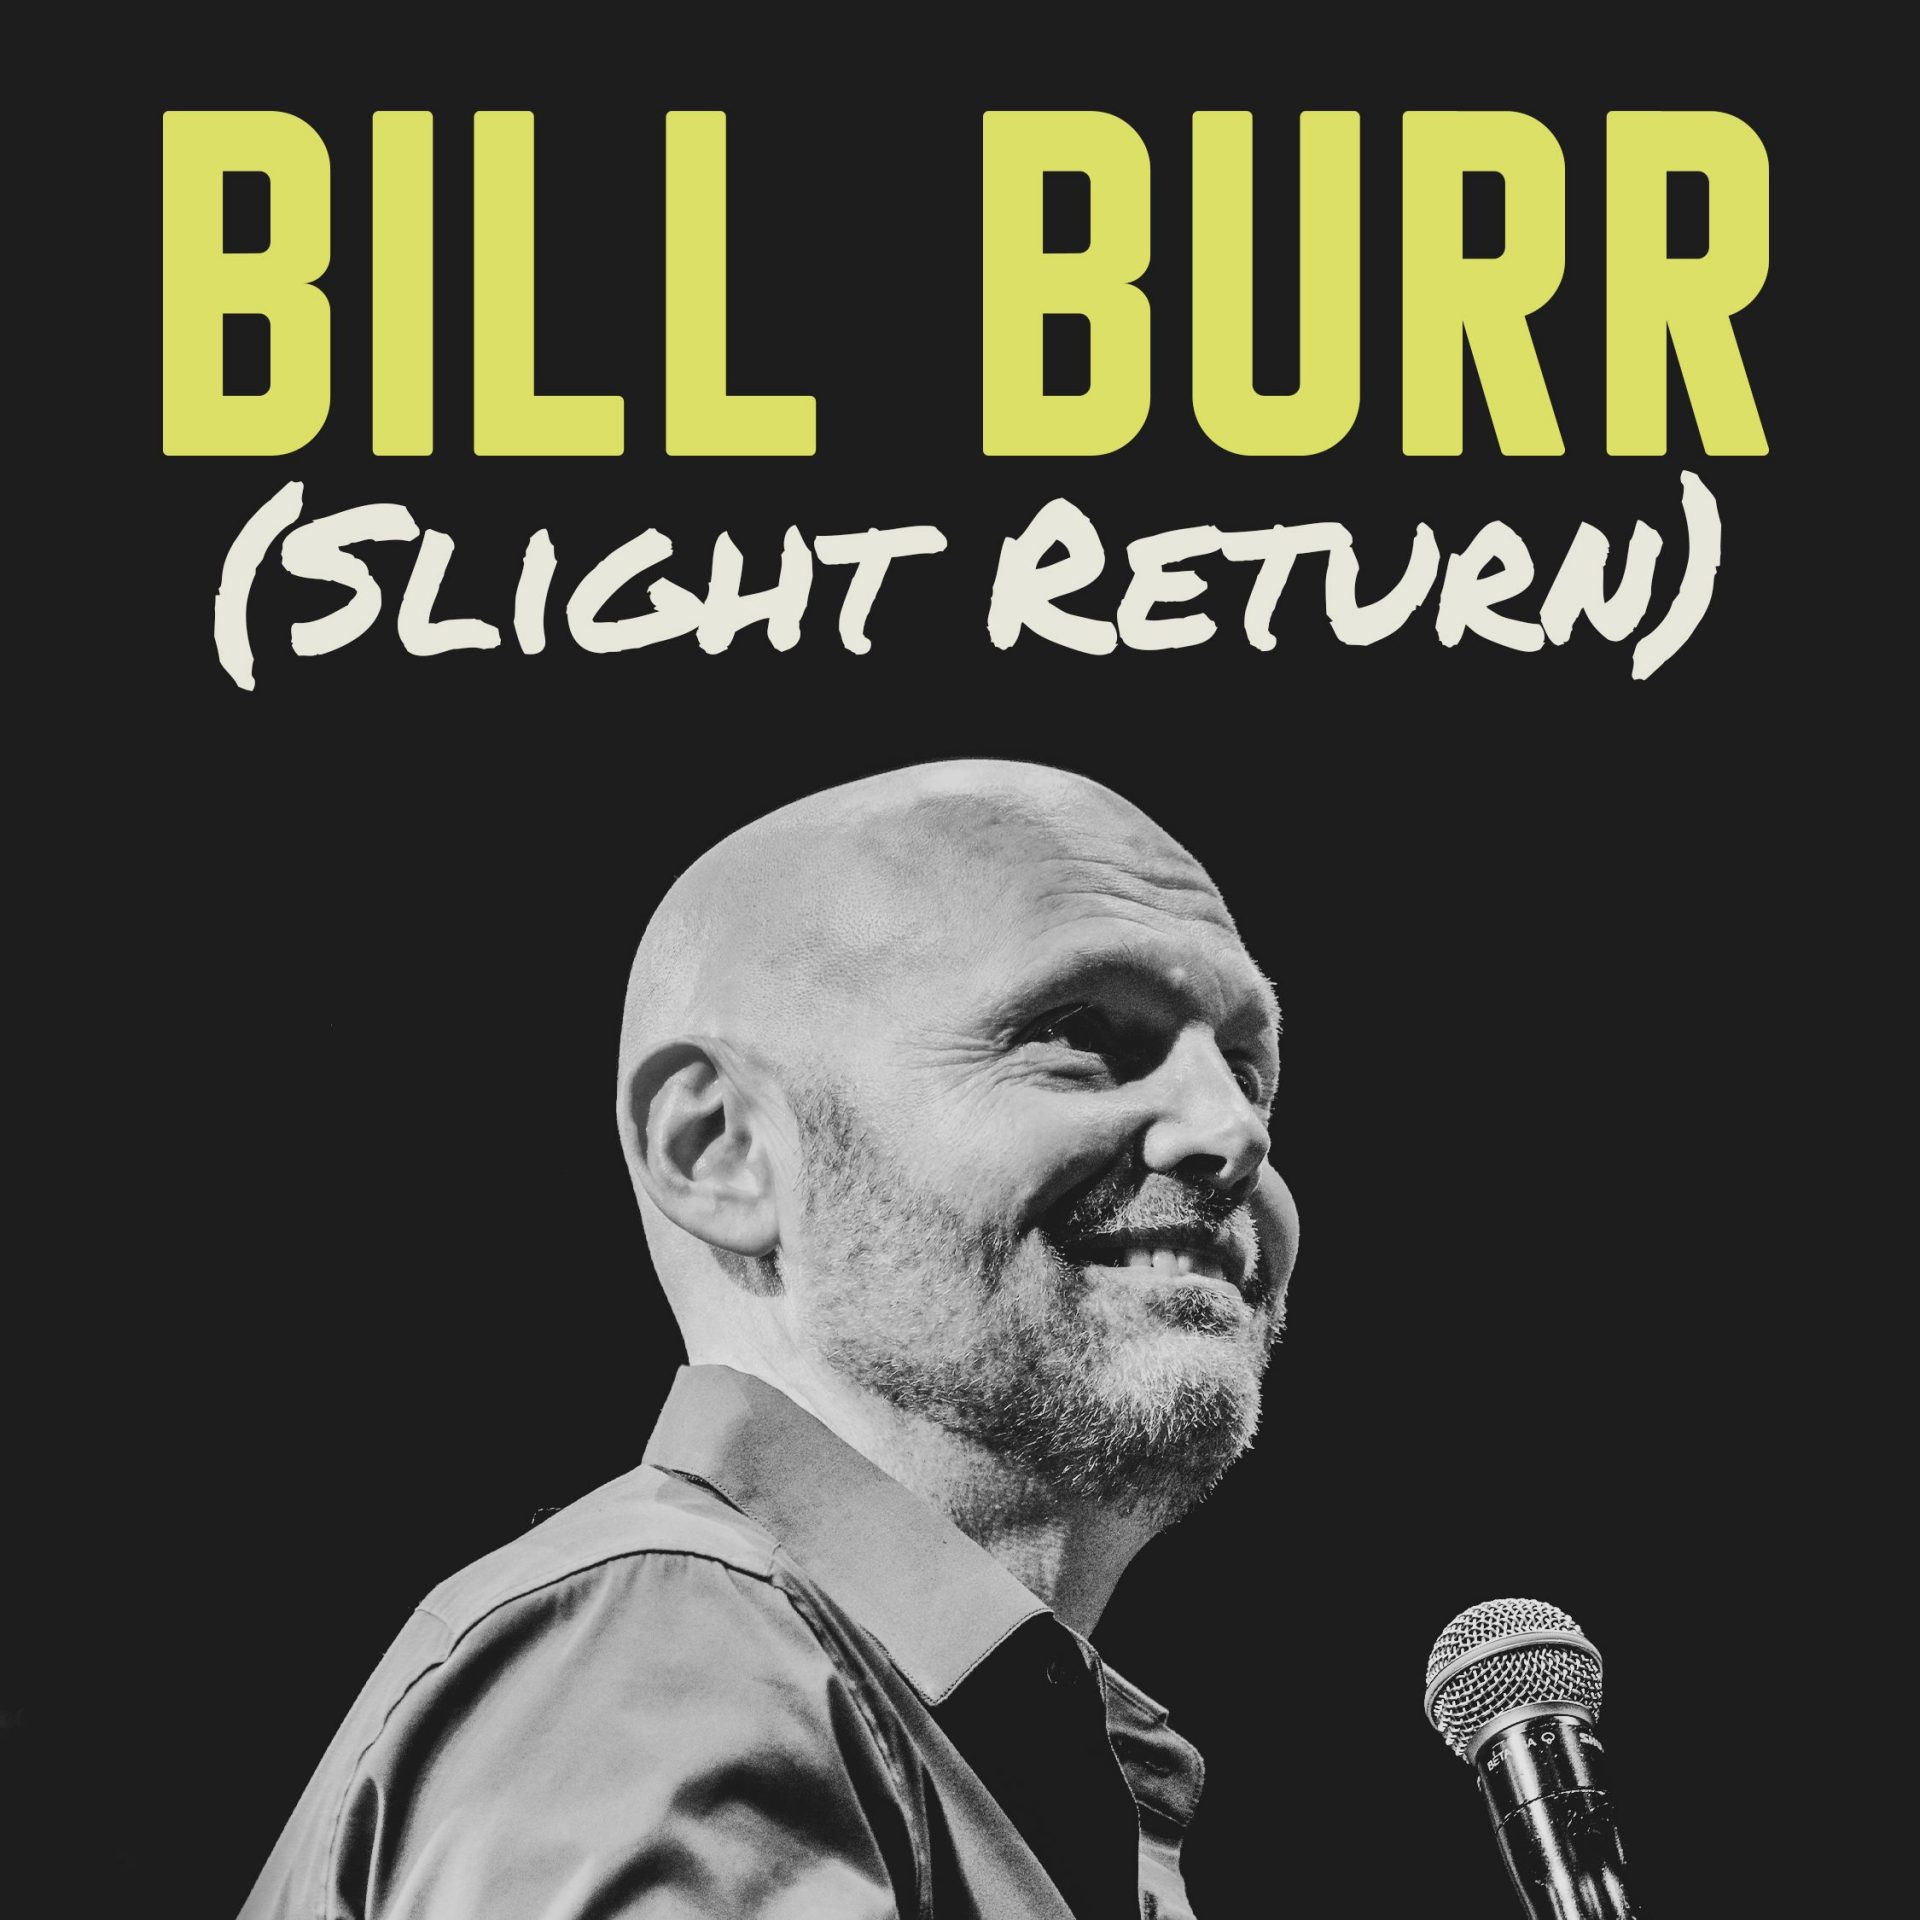 Comedian Bill Burr will be performing in Montreal next year